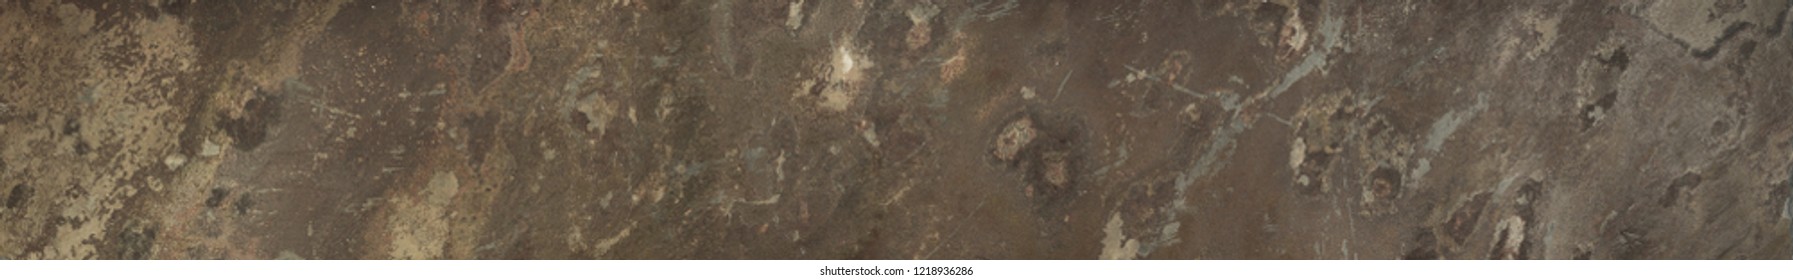 Large size, high resolution natural African stone texture macro image.Suitable for graphic, surface or pattern designs and print jobs.